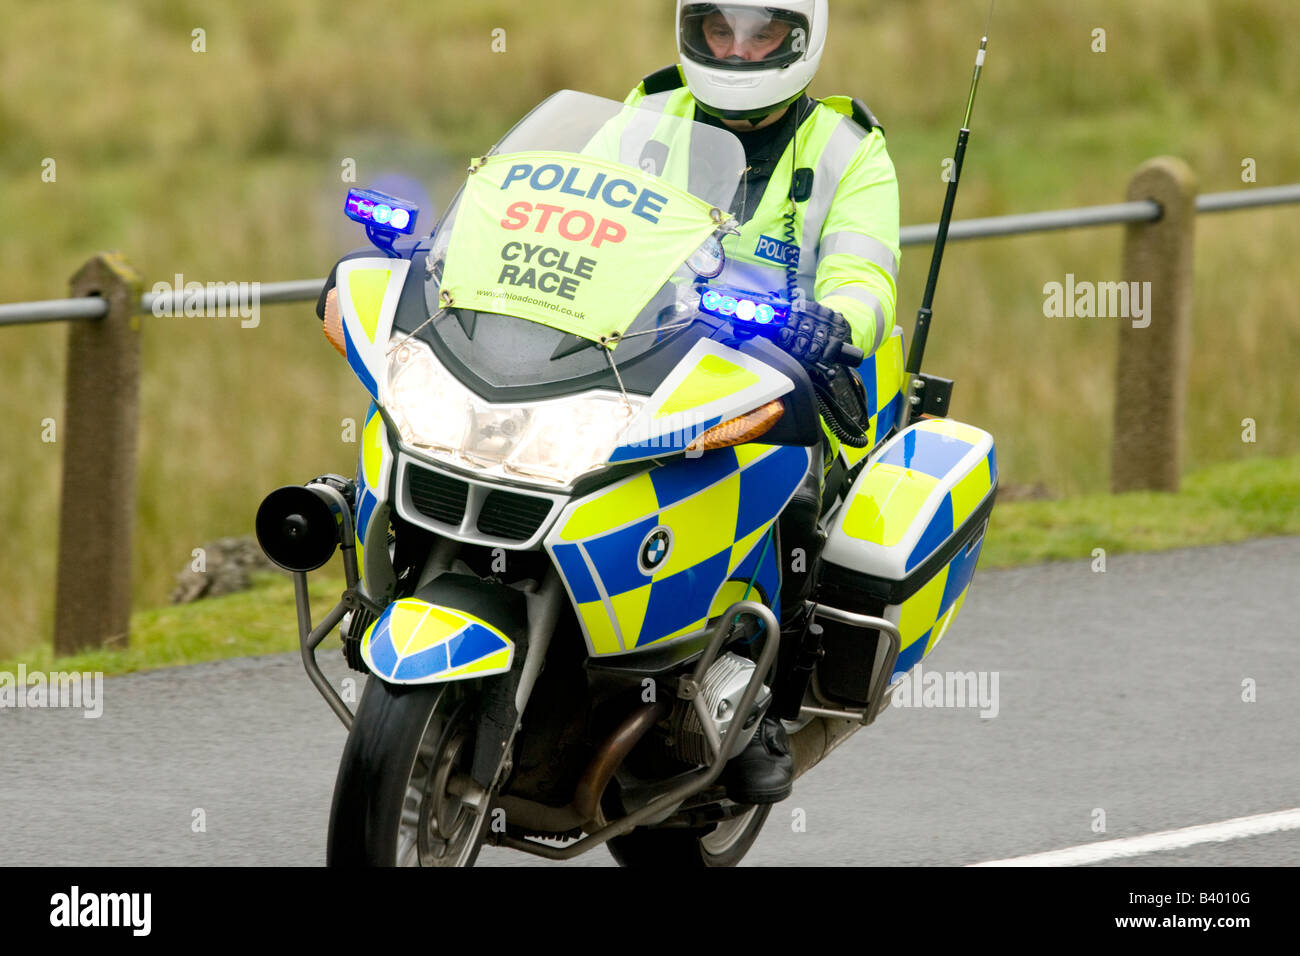 Motorbike traffic police motorcyclist with lights flashing escorting the Tour of Britain cycle race on rural road UK Stock Photo